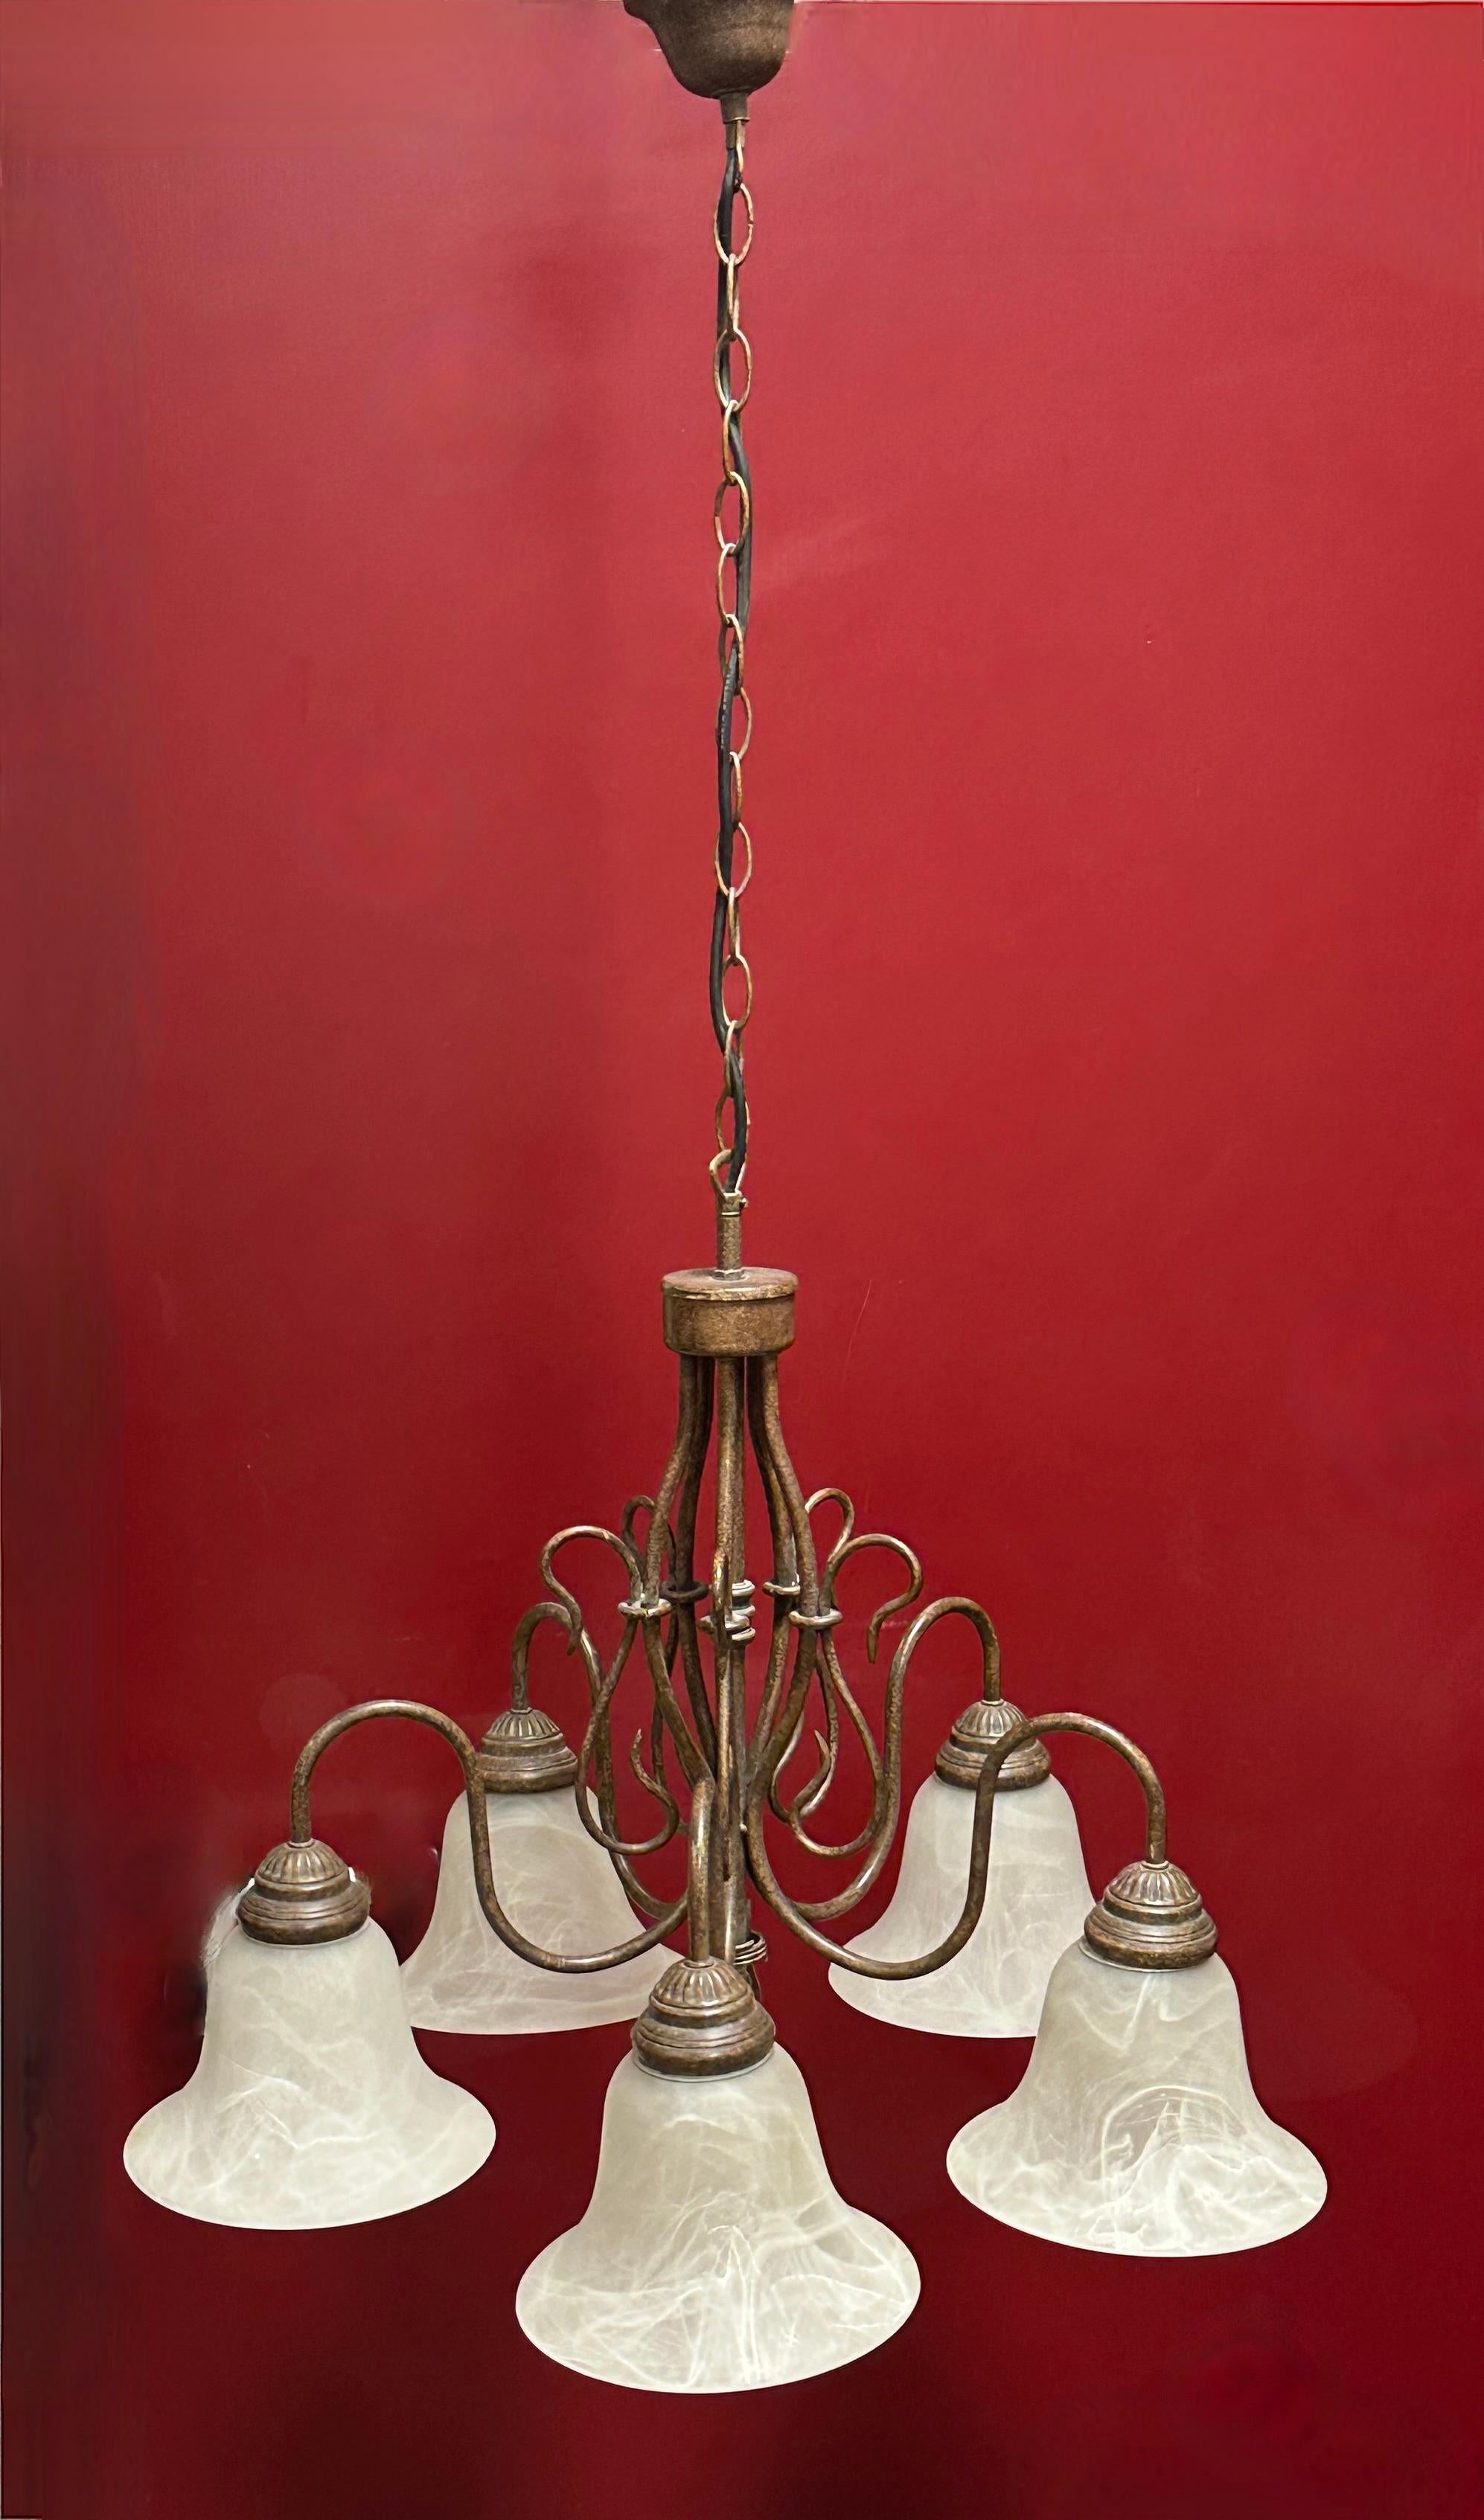 Petite Farmhouse style five-light chandelier. Functions as is with 5 E27 / 110 Volt light bulbs. Can take up to 60 Watts each bulb. Beautiful metal five arm chandelier with glass shades. Cain and Canopy approx. 24 inches in length. Colors are a